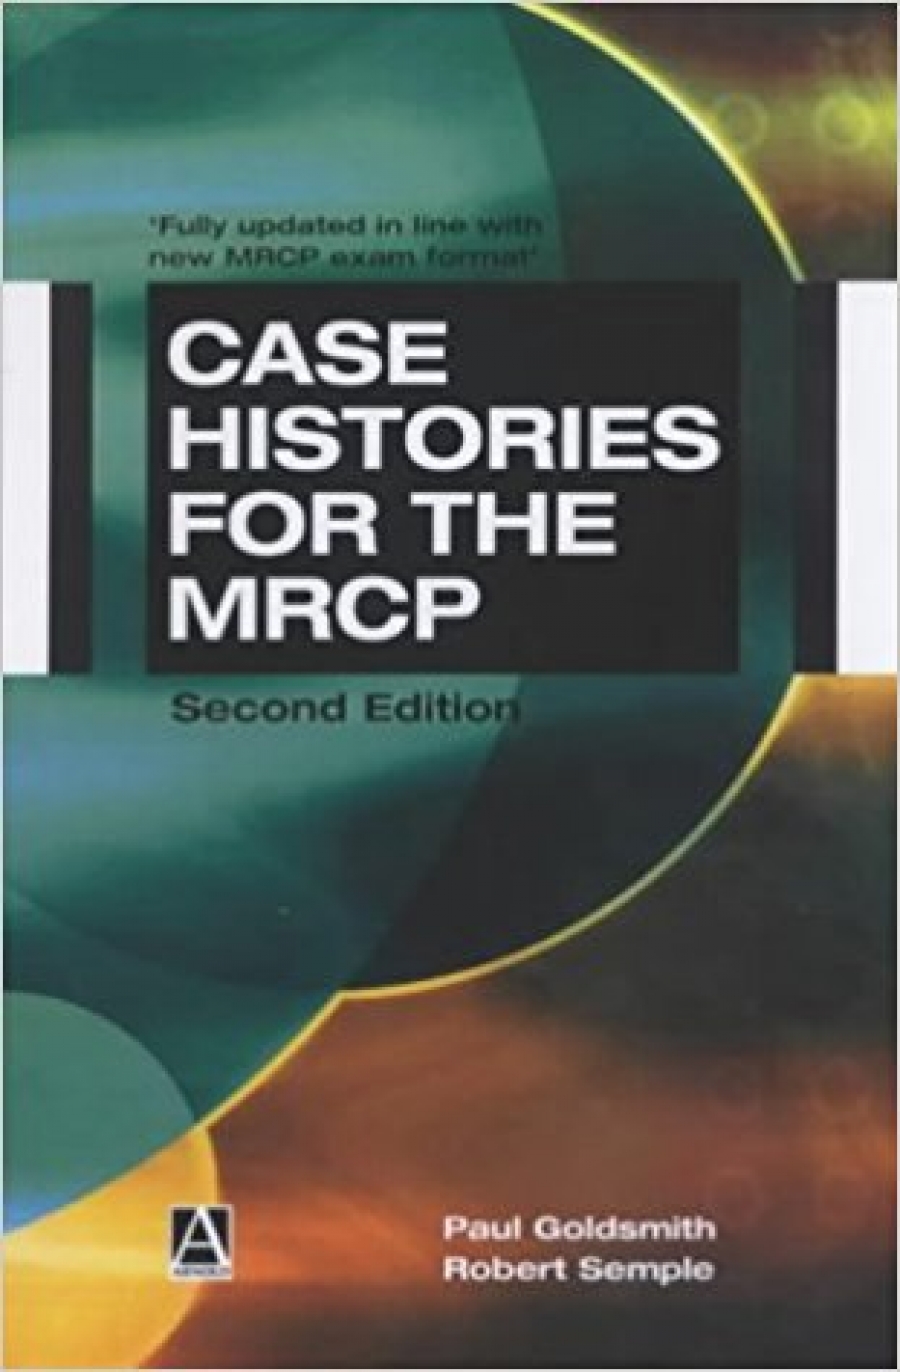 Case Histories for the MRCP 2nd Edition